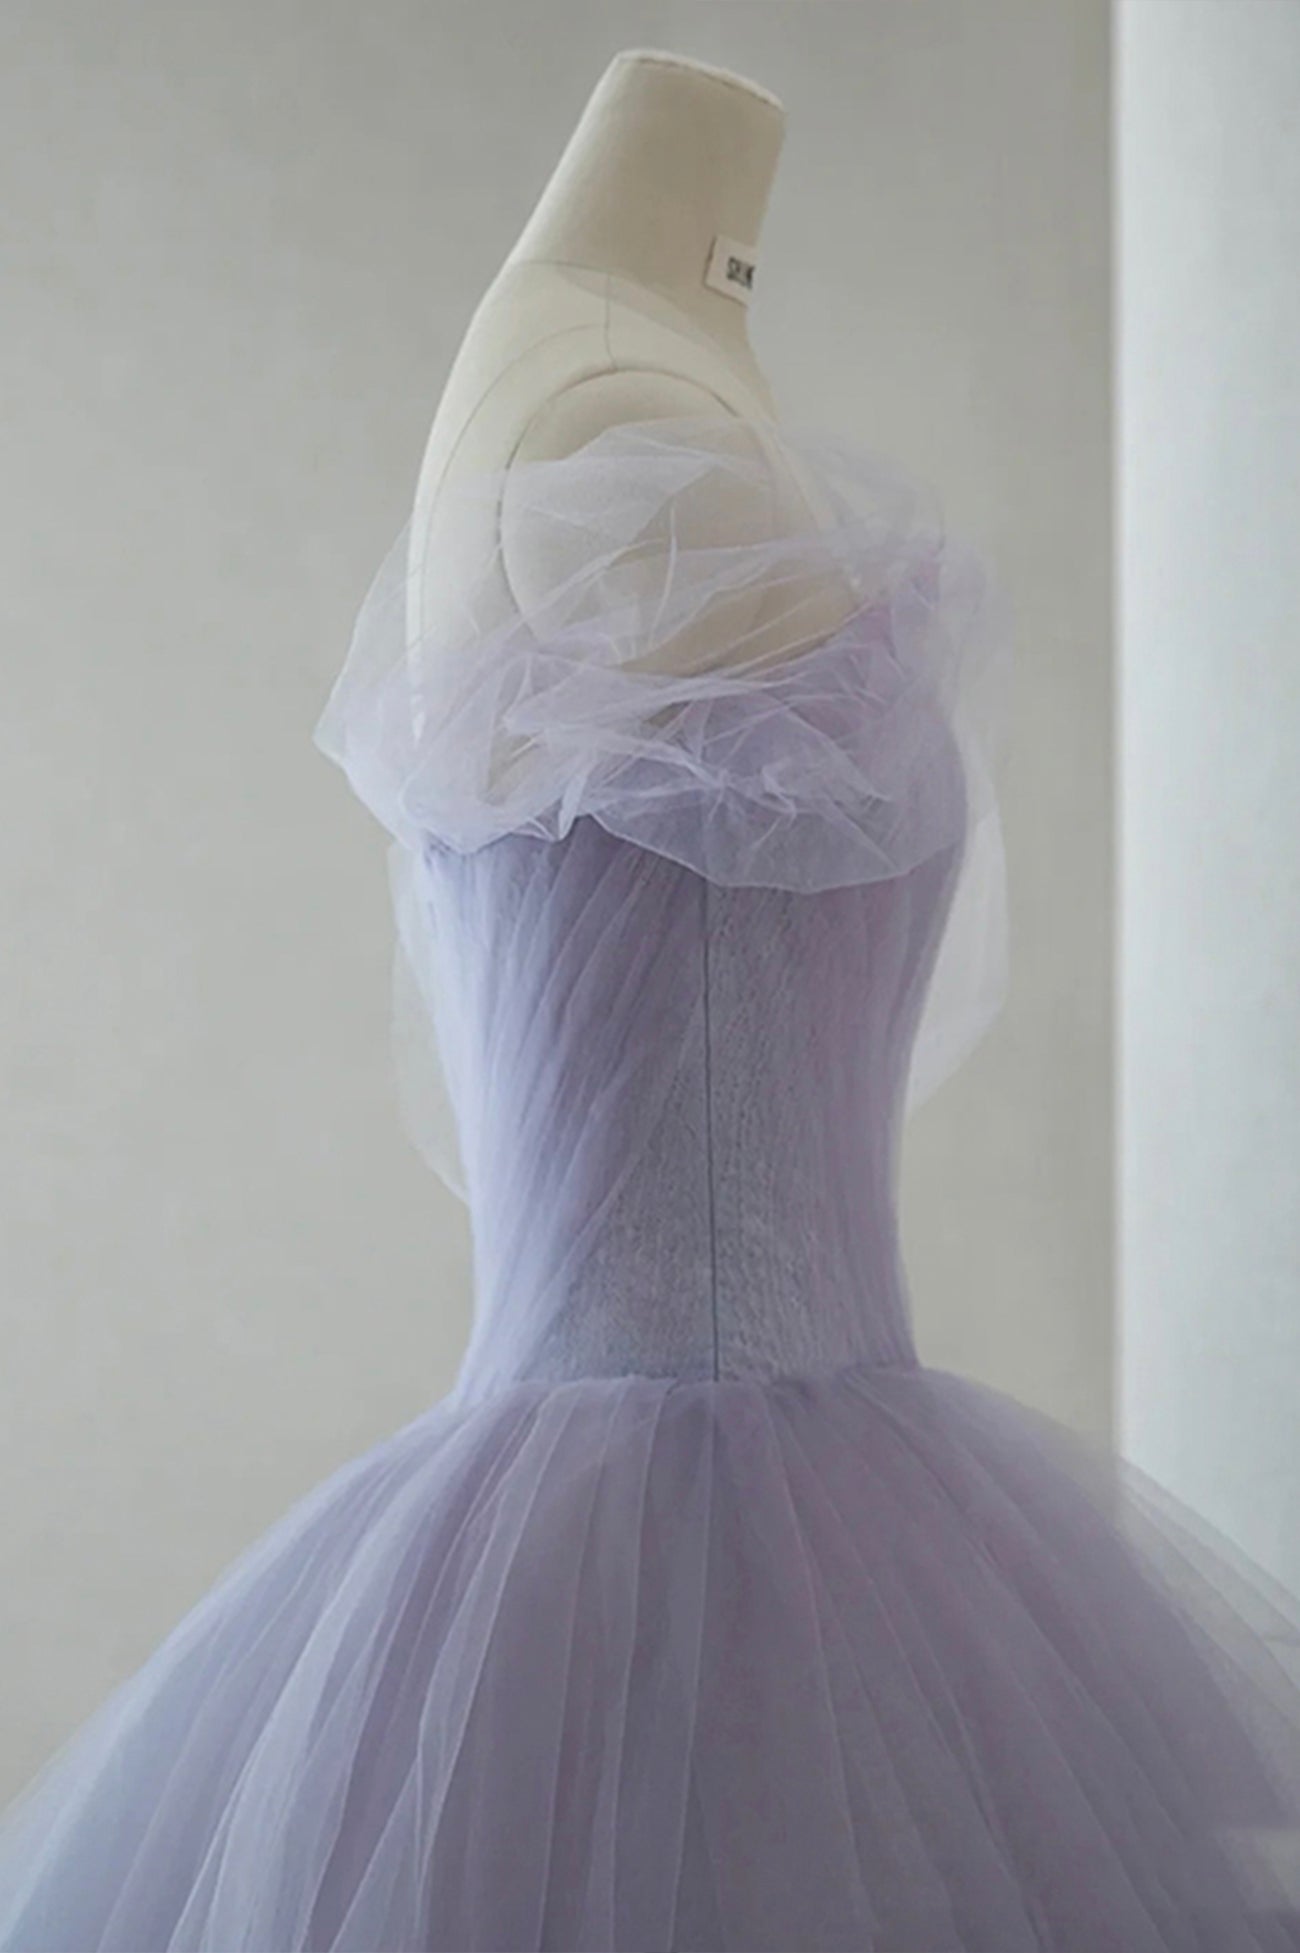 Homecomming Dresses Short, Purple Tulle Short A-Line Prom Dress, Cute Off the Shoulder Party Dress